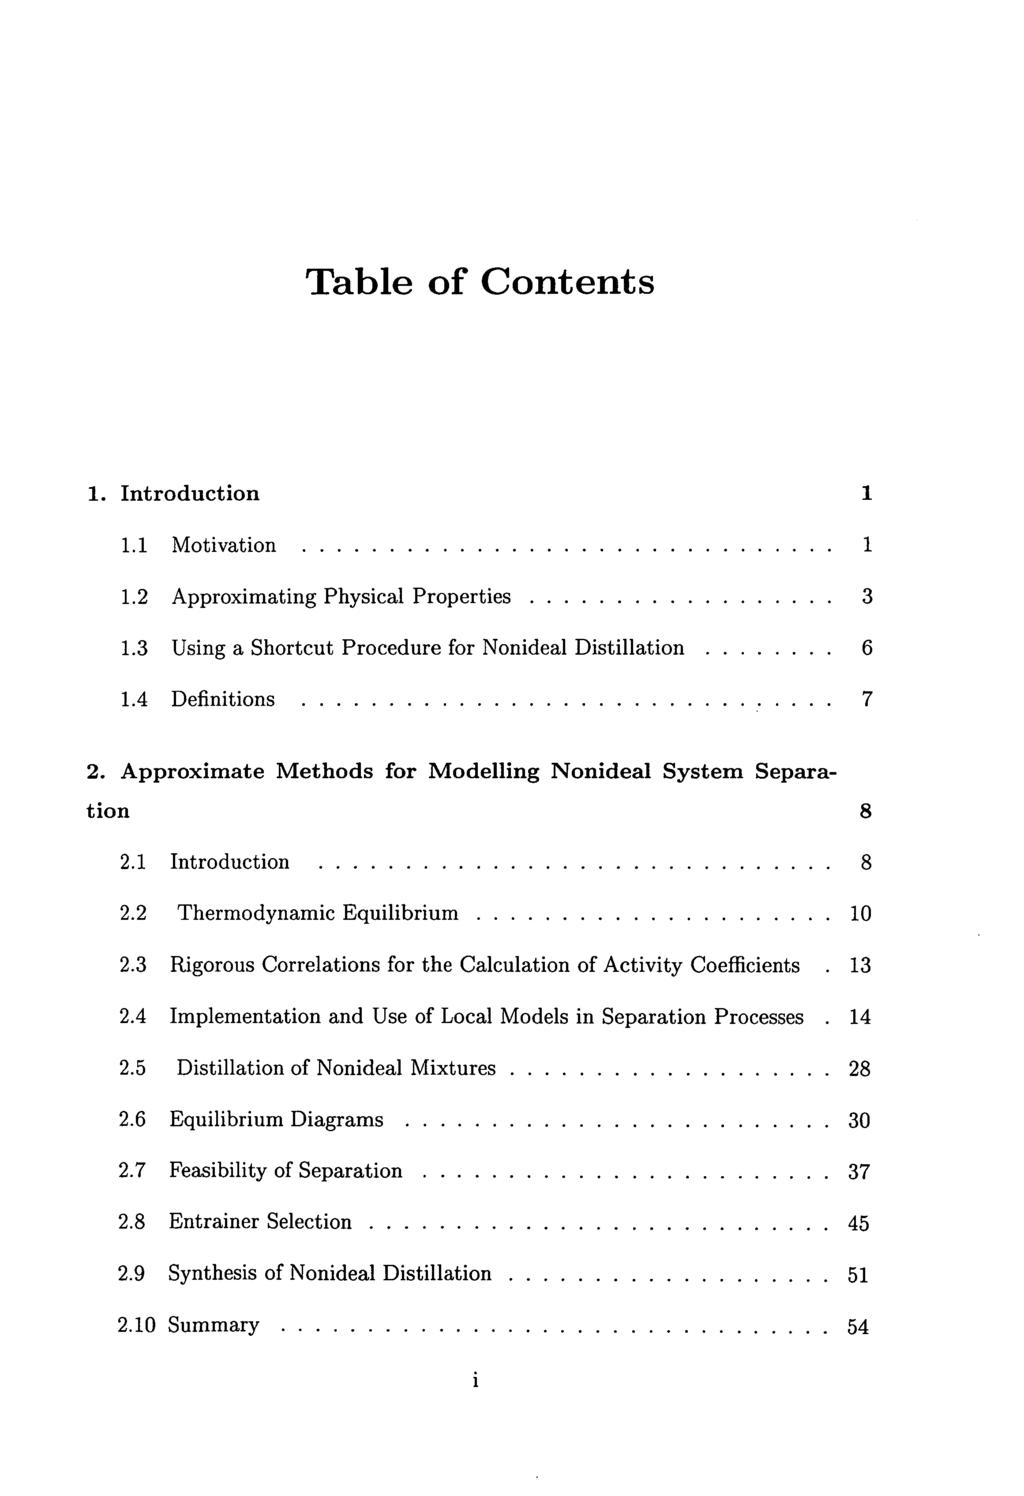 Table of Contents Introduction 1 1.1 Motivation...1 1.2 Approximating Physical Properties...3 1.3 Using a Shortcut Procedure for Nonideal Distillation...6 1.4 Definitions.